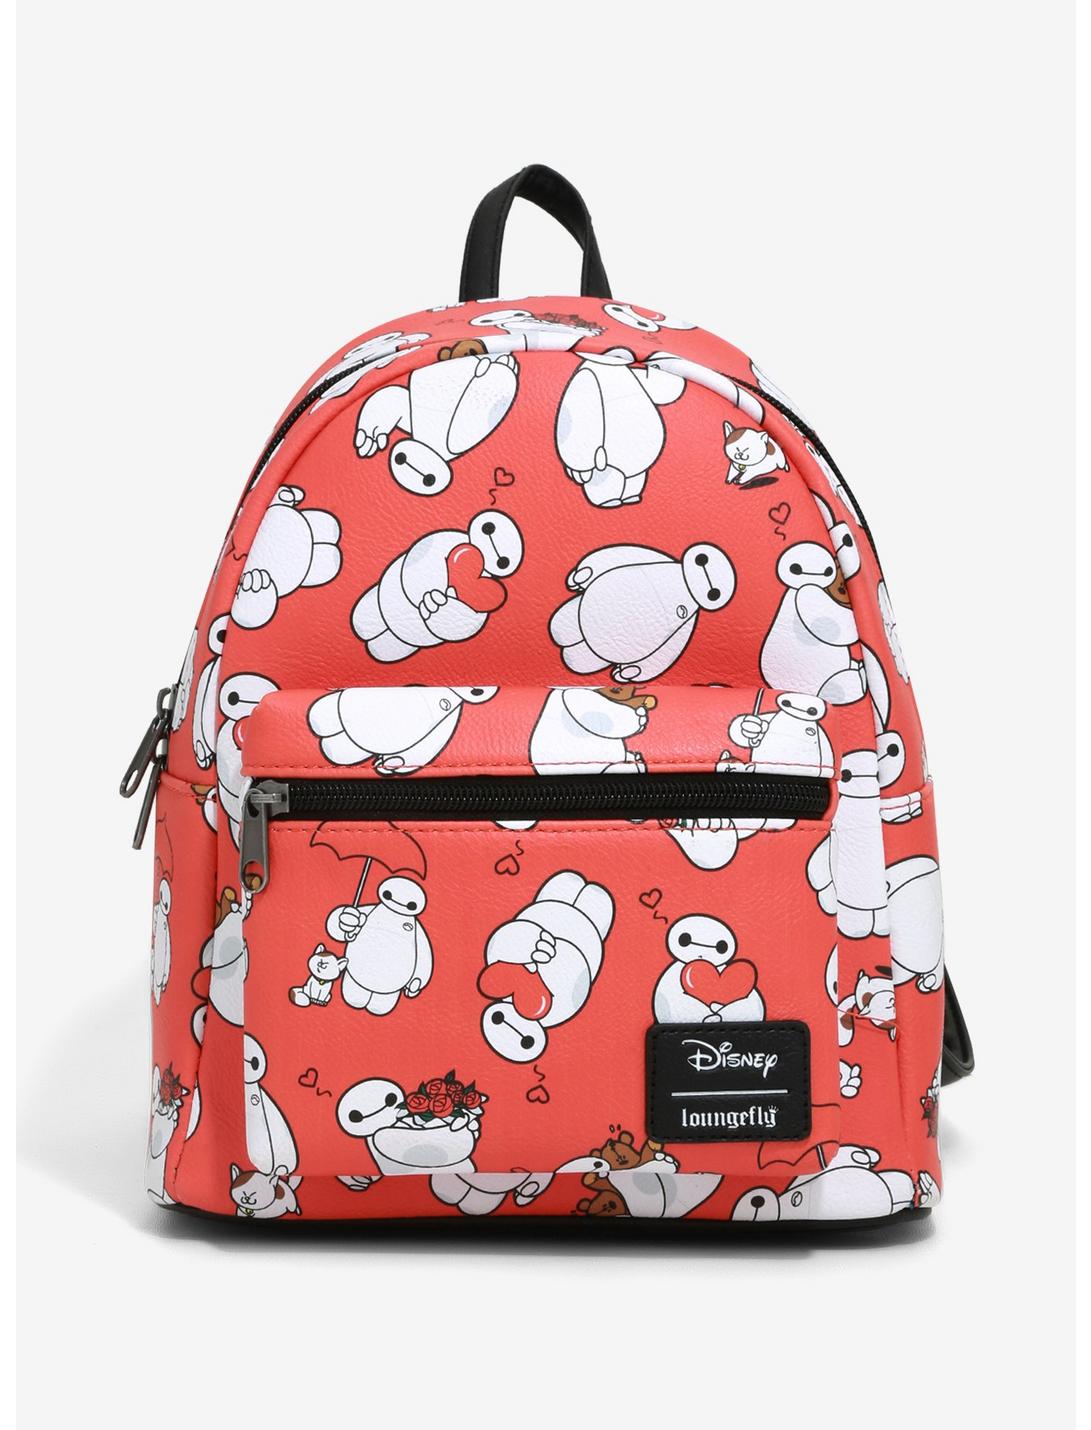 Disney Big Hero 6 Large 16" inches Rolling backpack BRAND NEW Licensed Product